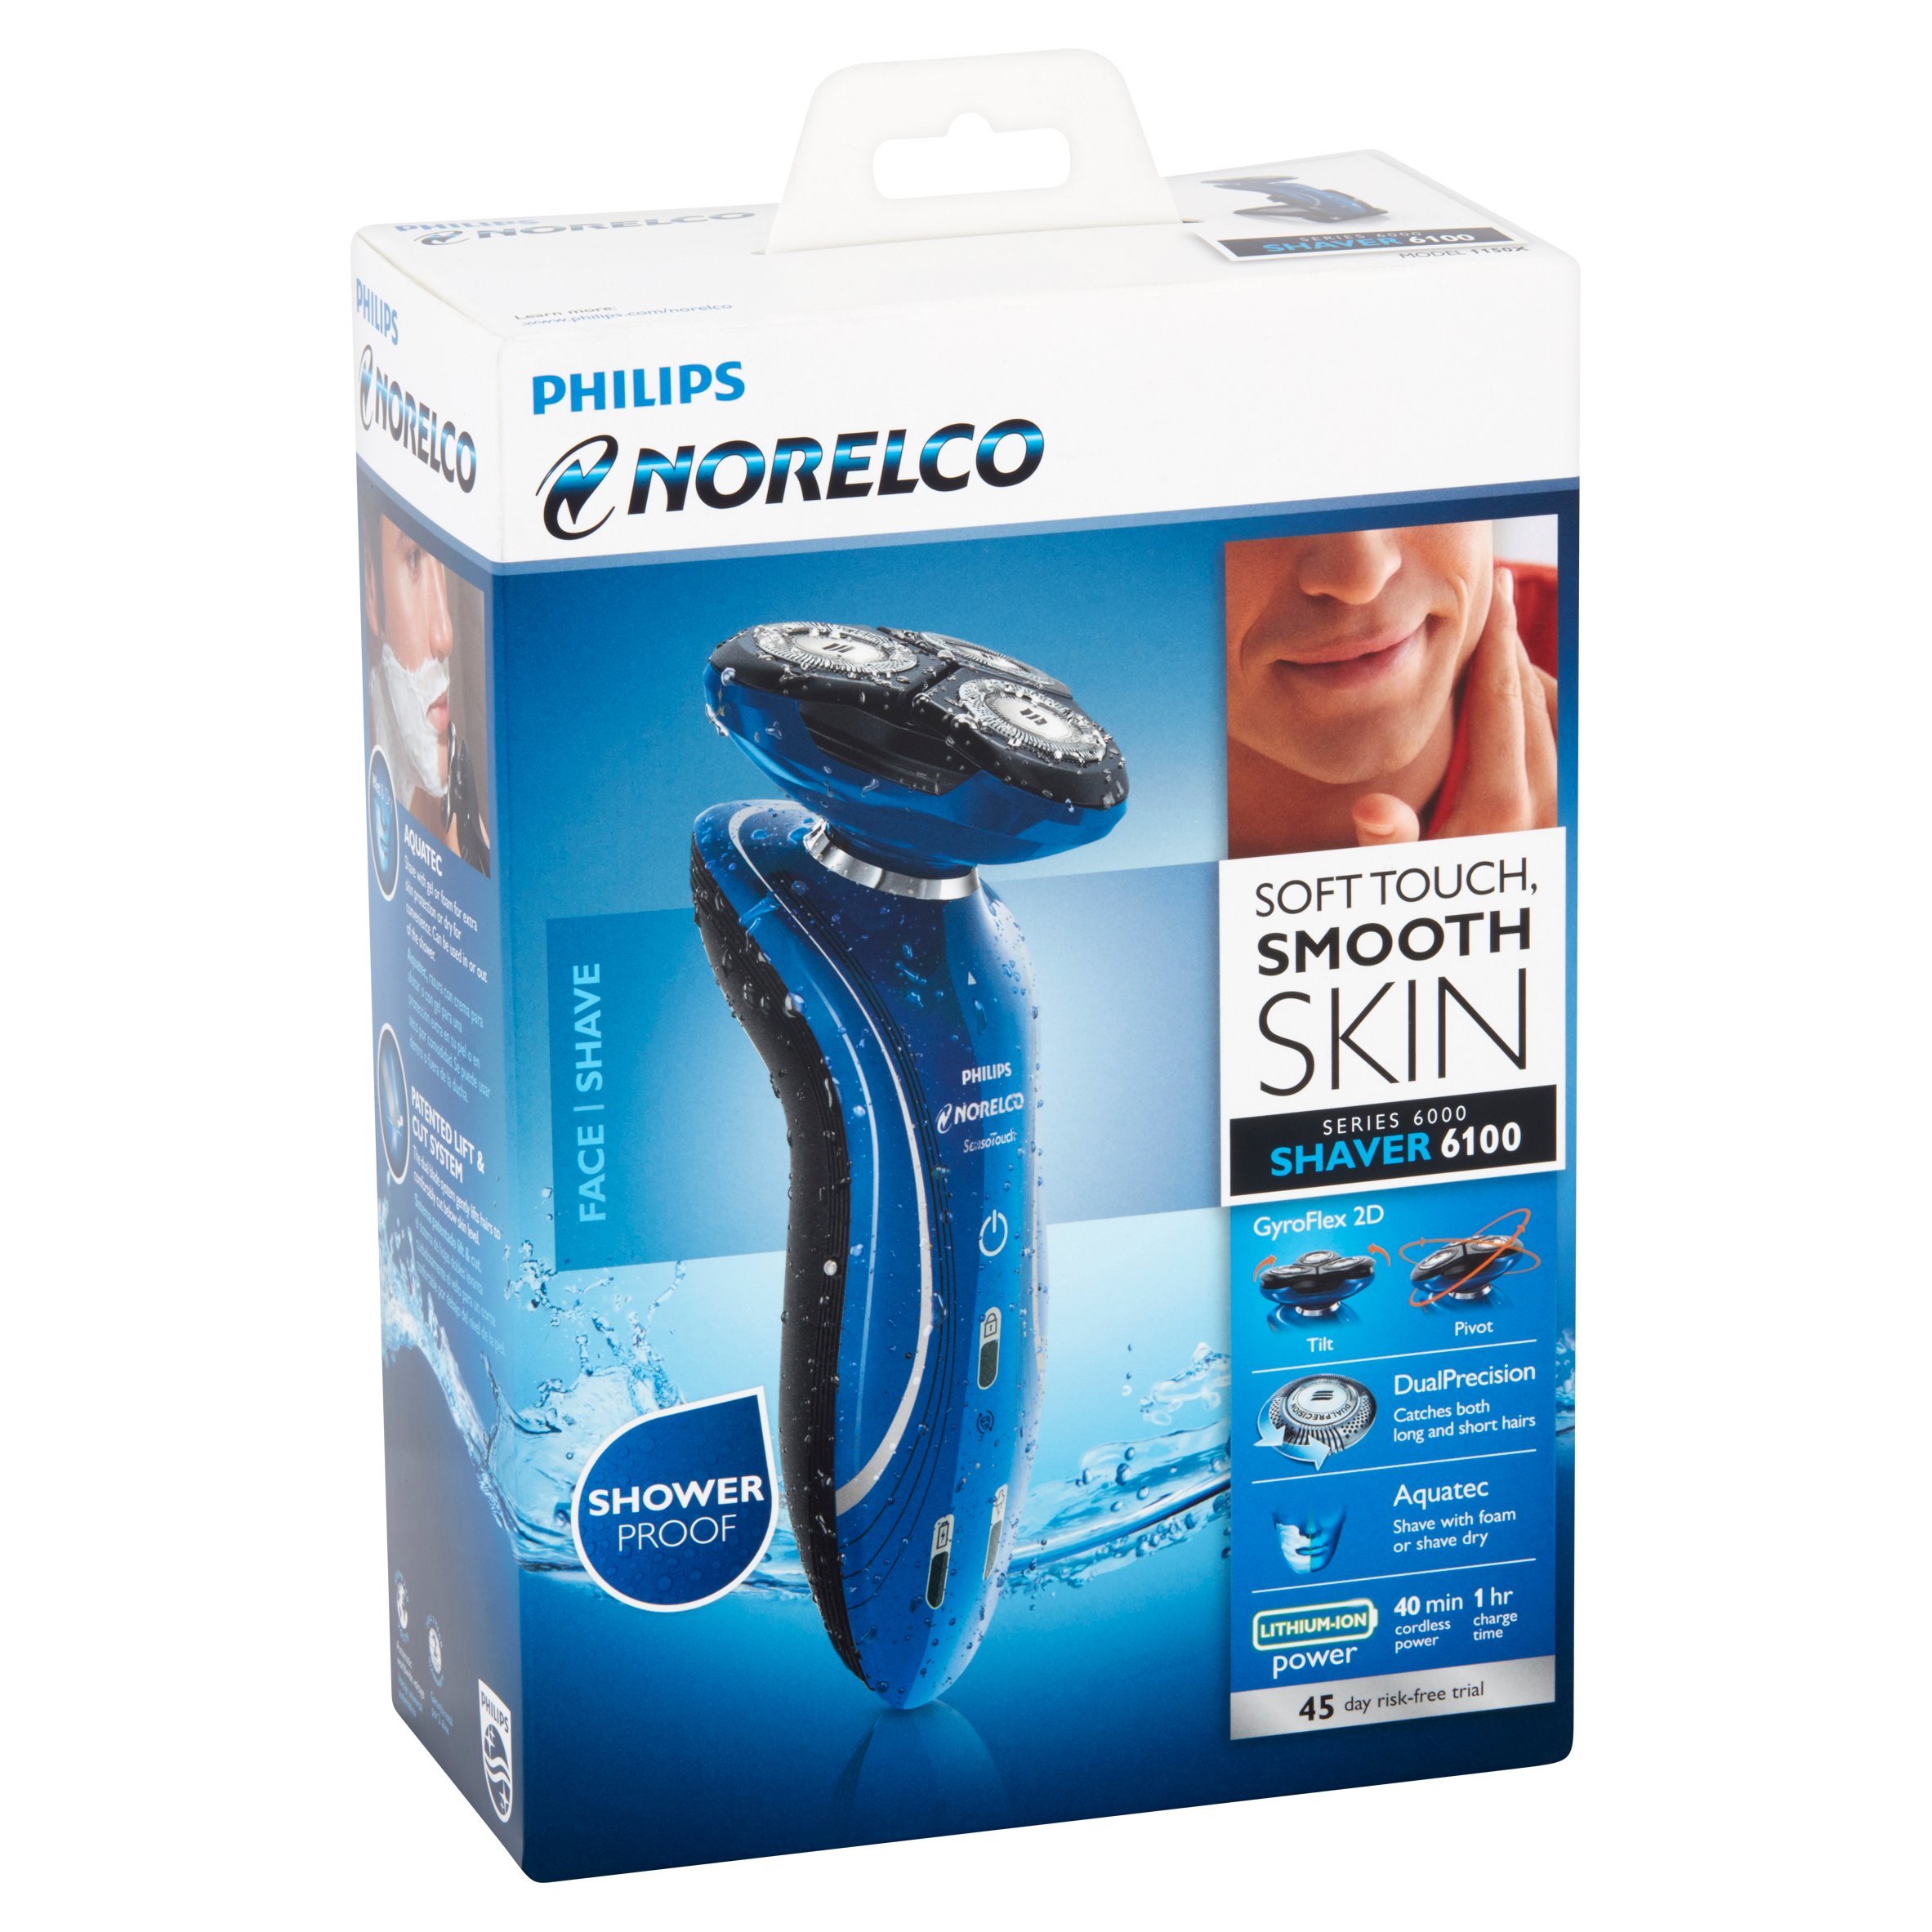 Philips Norelco Electric Men's Electric Shaver 6100, 1150X/40 - image 5 of 7